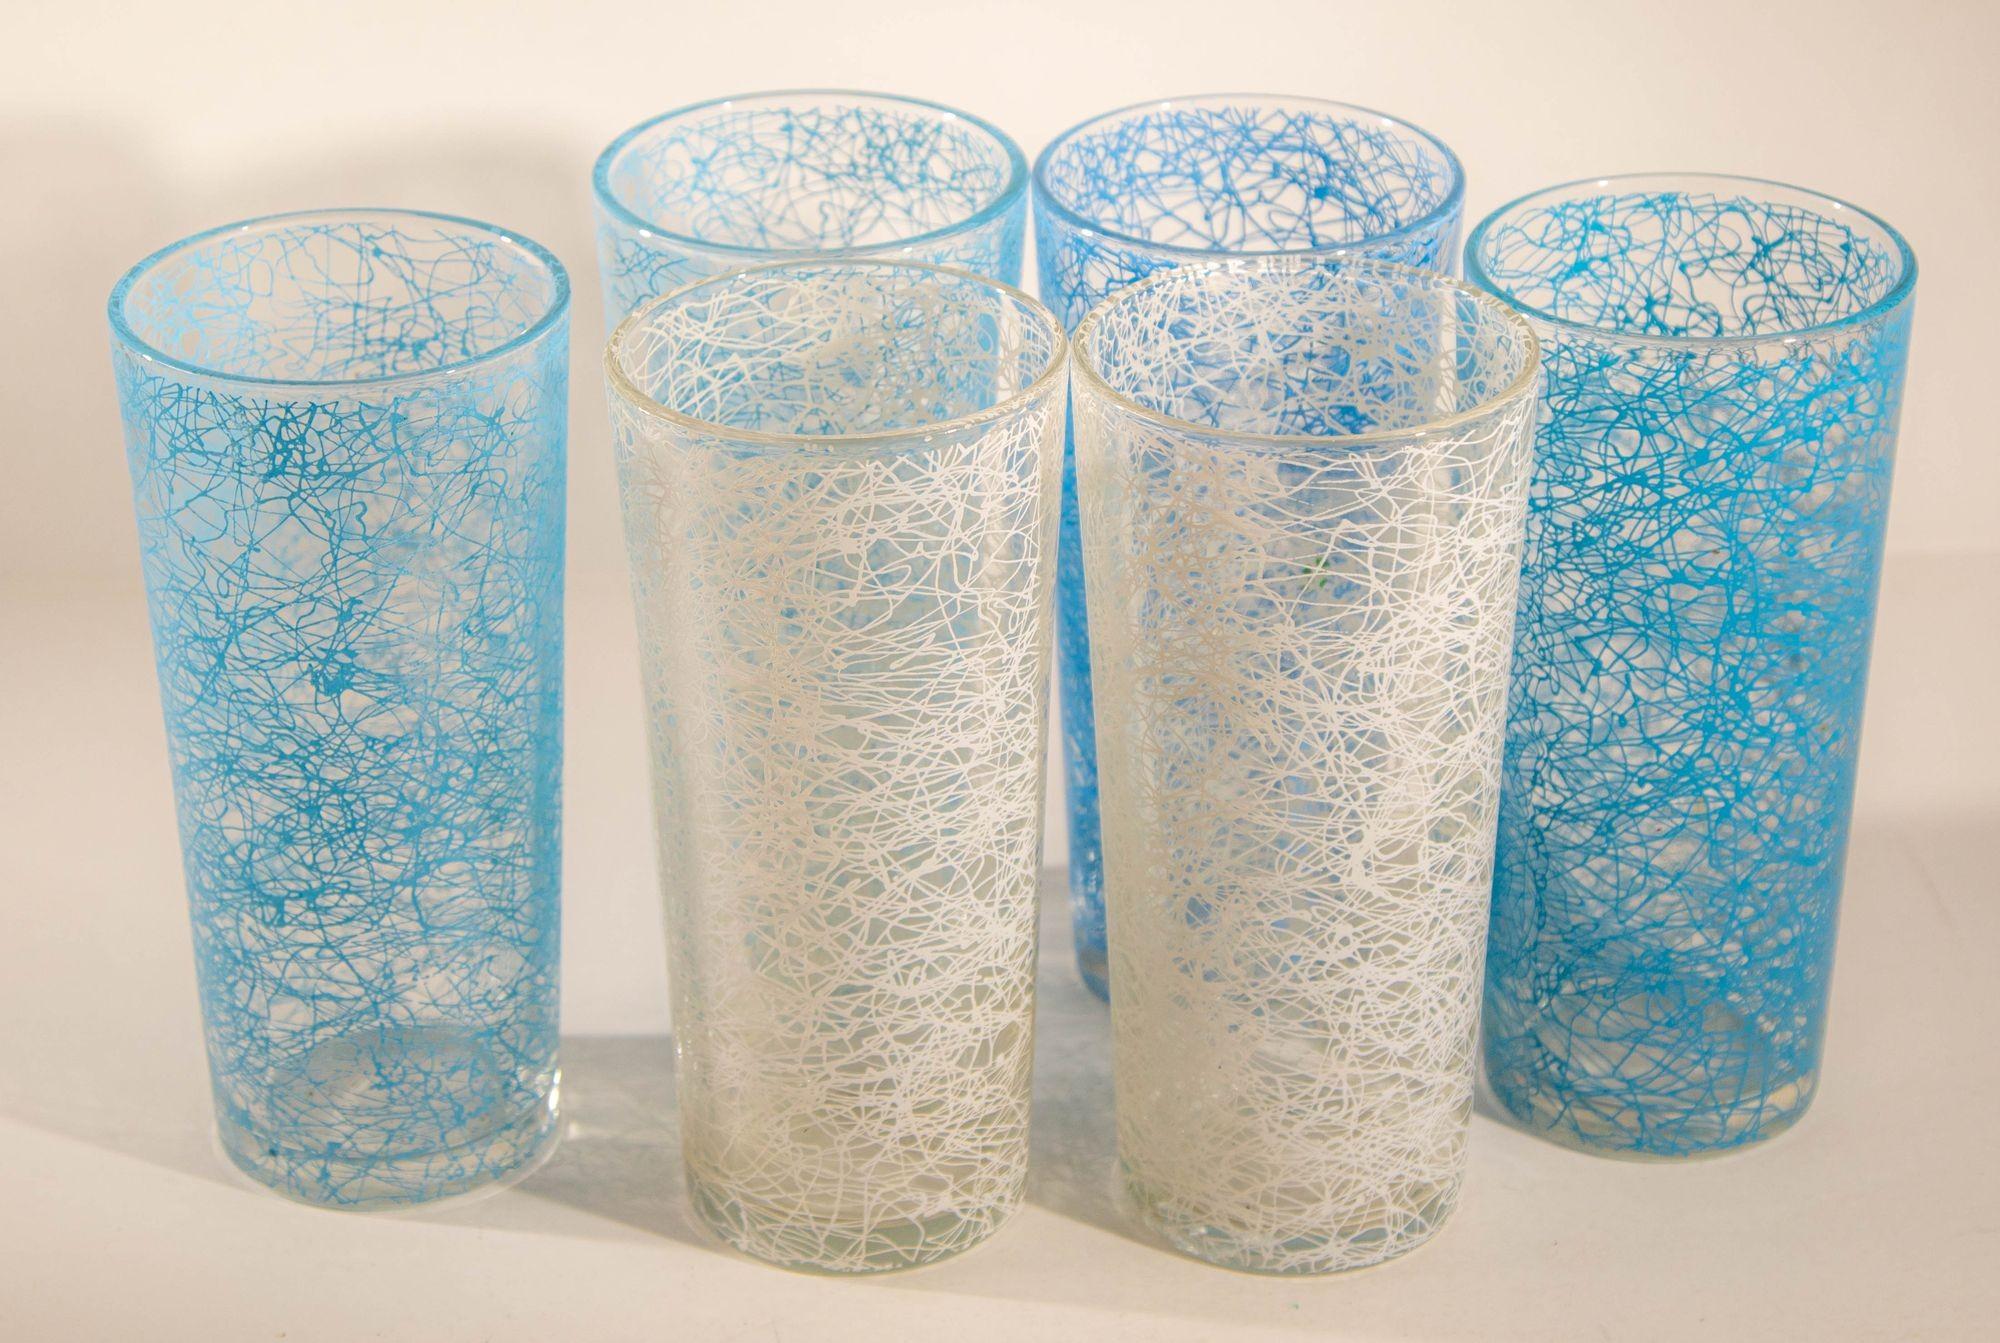 Vintage Collectible Retro Highball Spaghetti Tumblers Set of 6 Blue and White For Sale 6